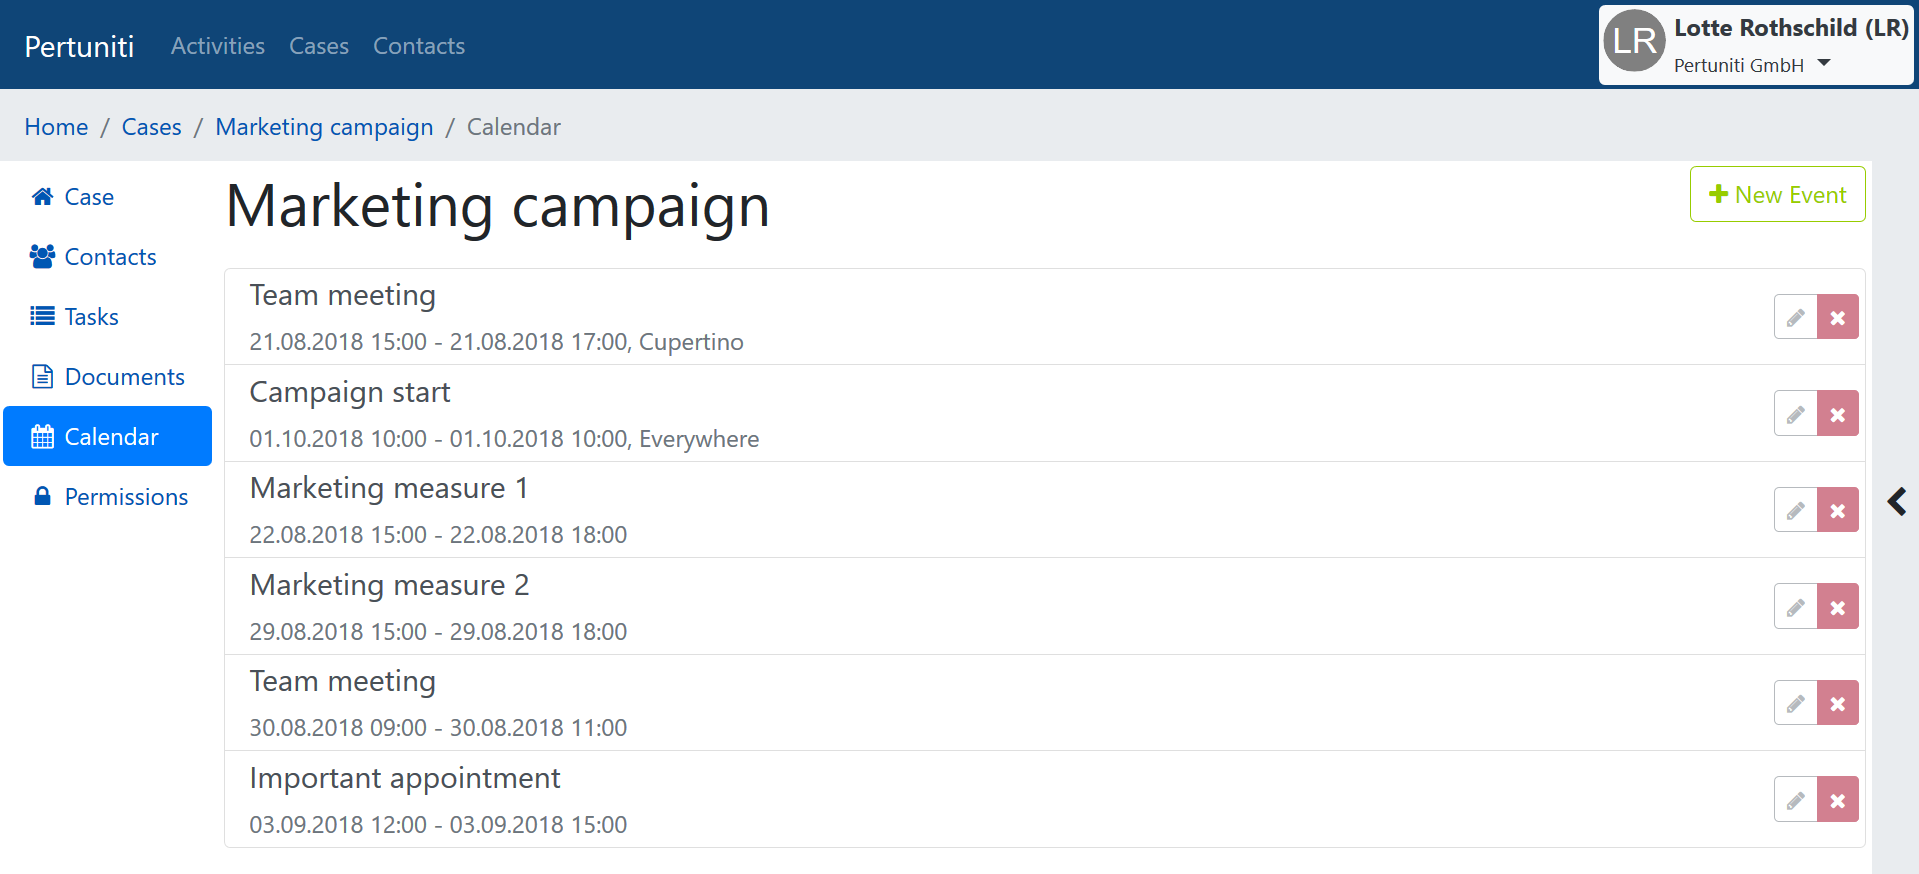 Enter important appointments and deadlines to your calendar, to make sure your campaign proceeds according to schedule.